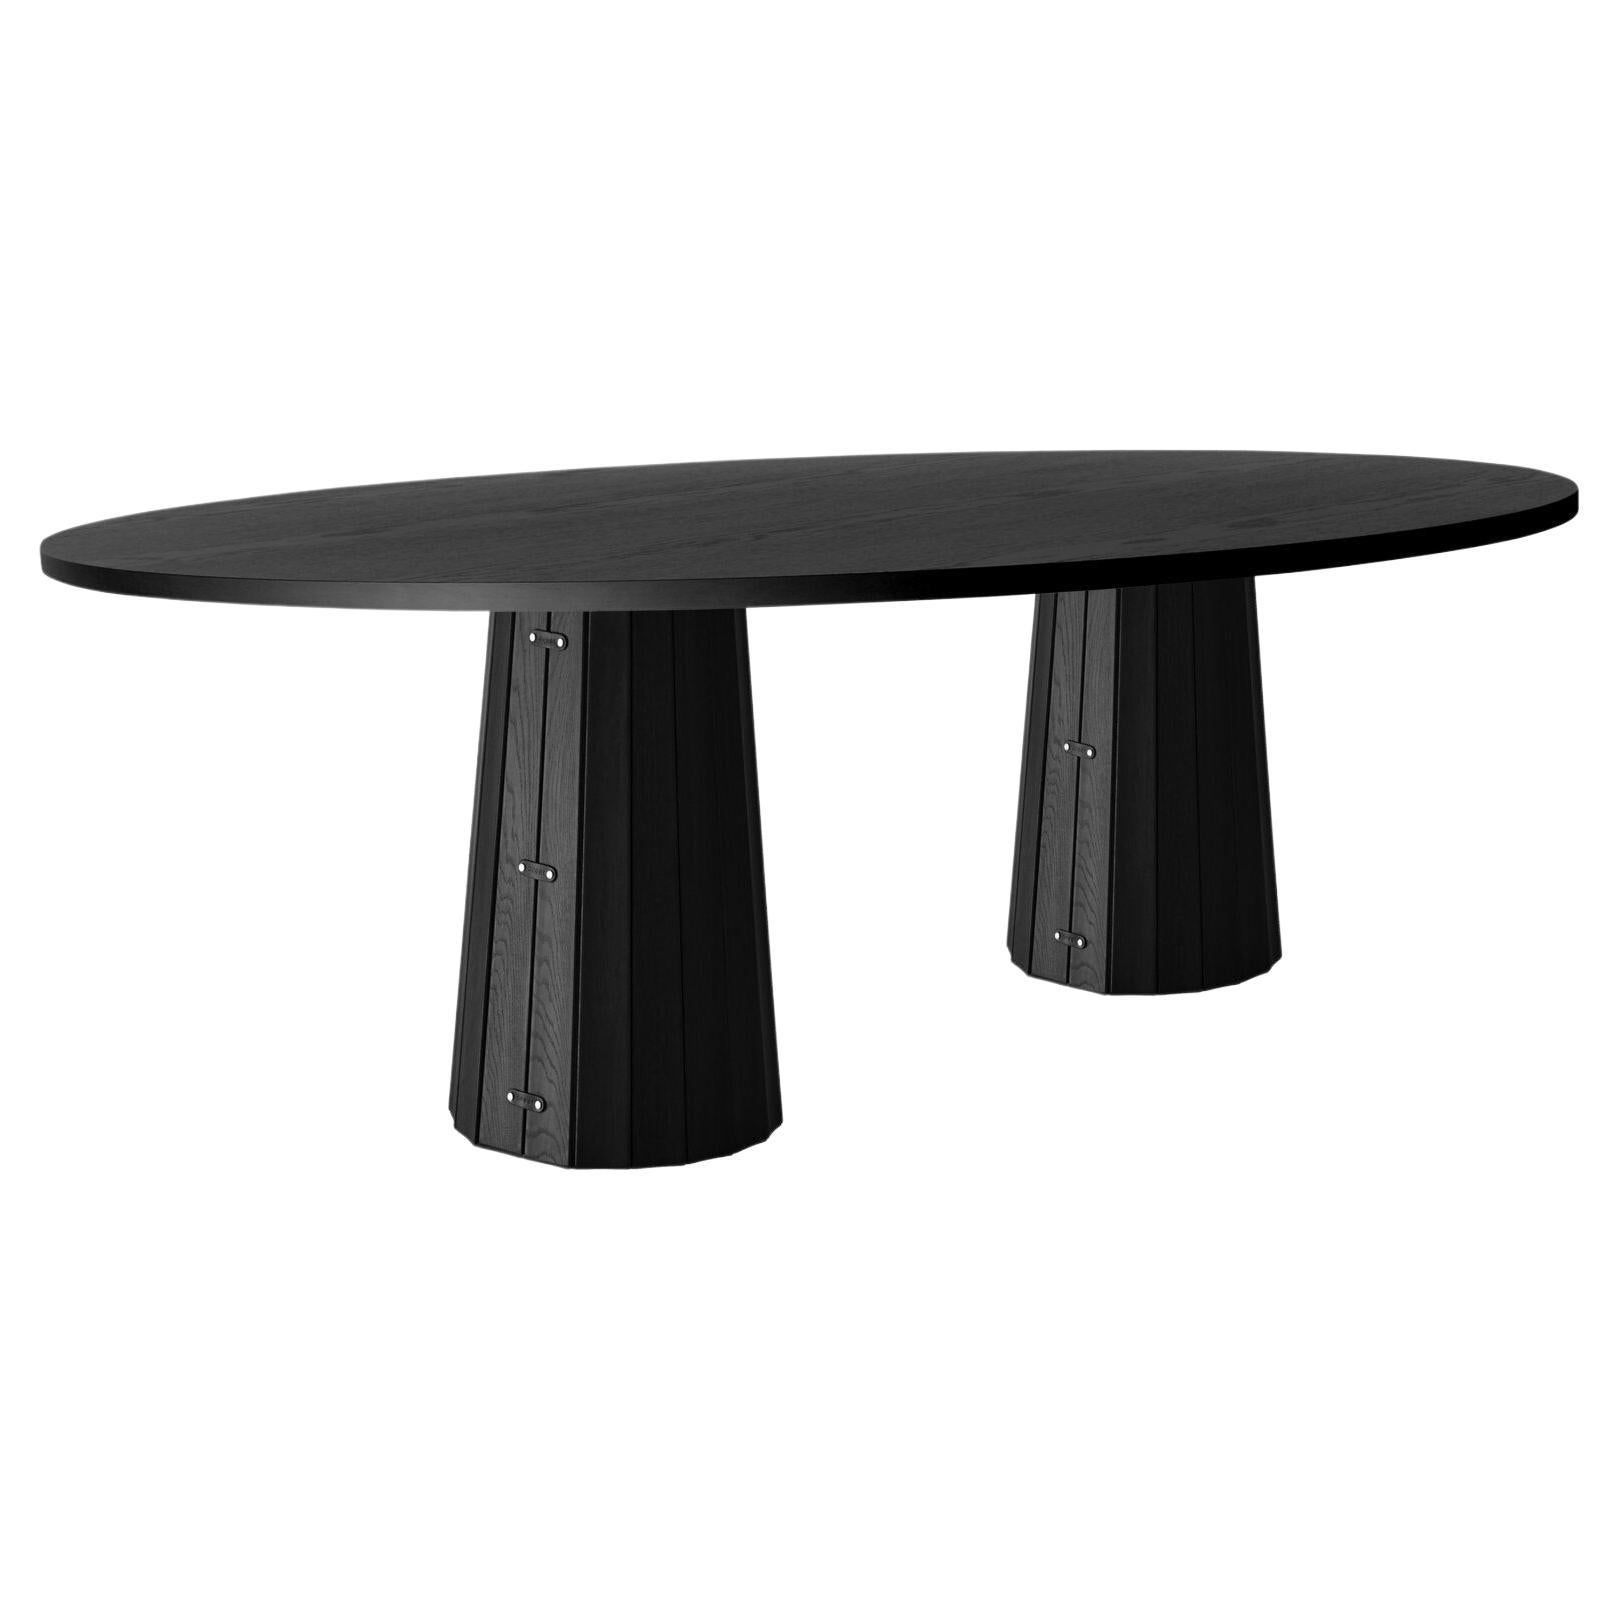 Moooi Container Bodhi 7130 Large Oval Dinning Table with Black Stained Oak Top